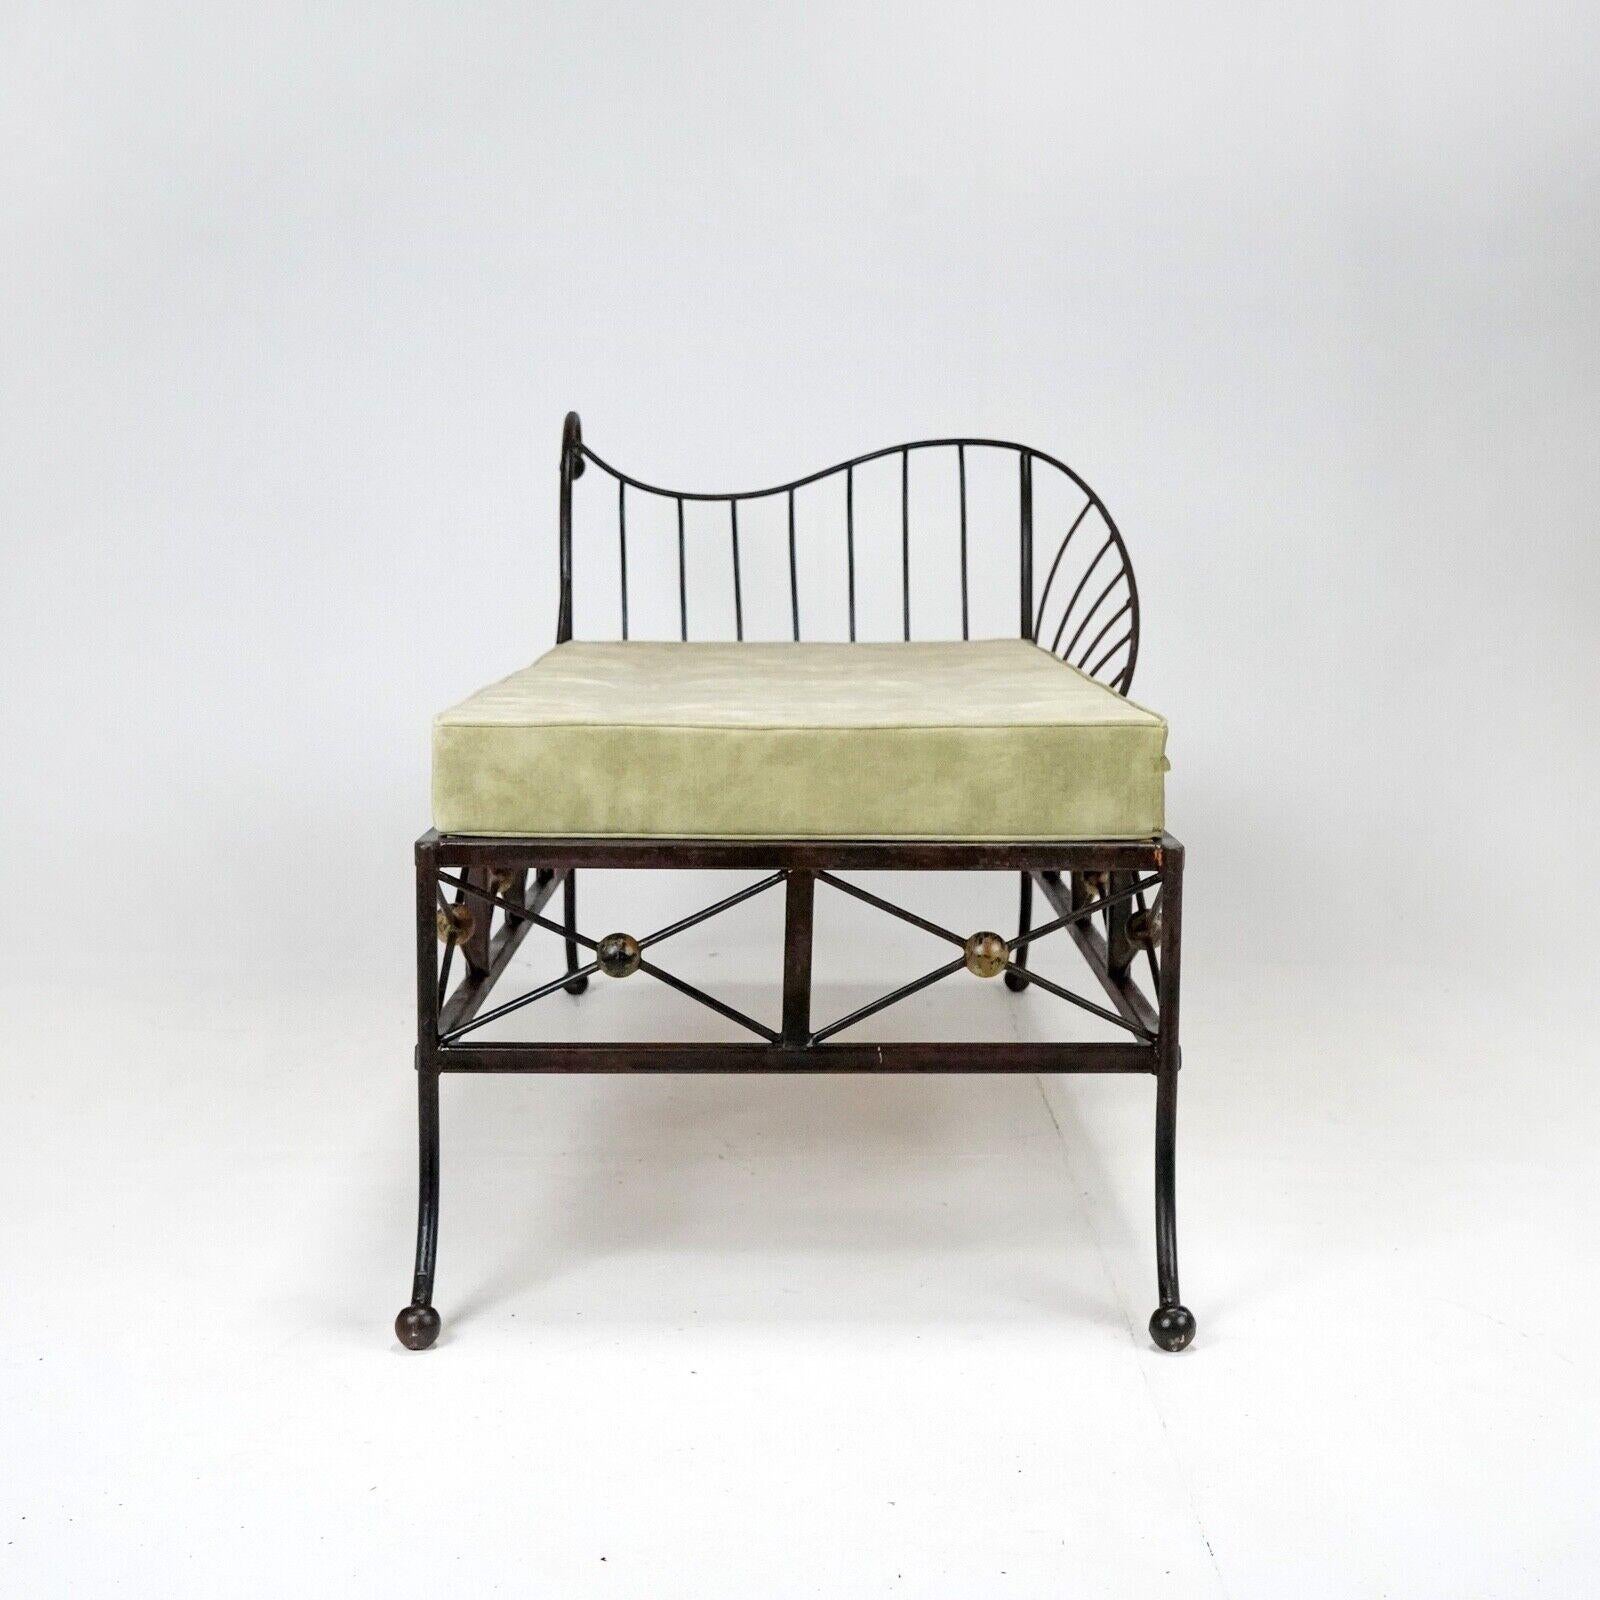 Vintage French Box Steel Metal Day Bed, Sun Lounger, Chaise Lounge Green Seat 6